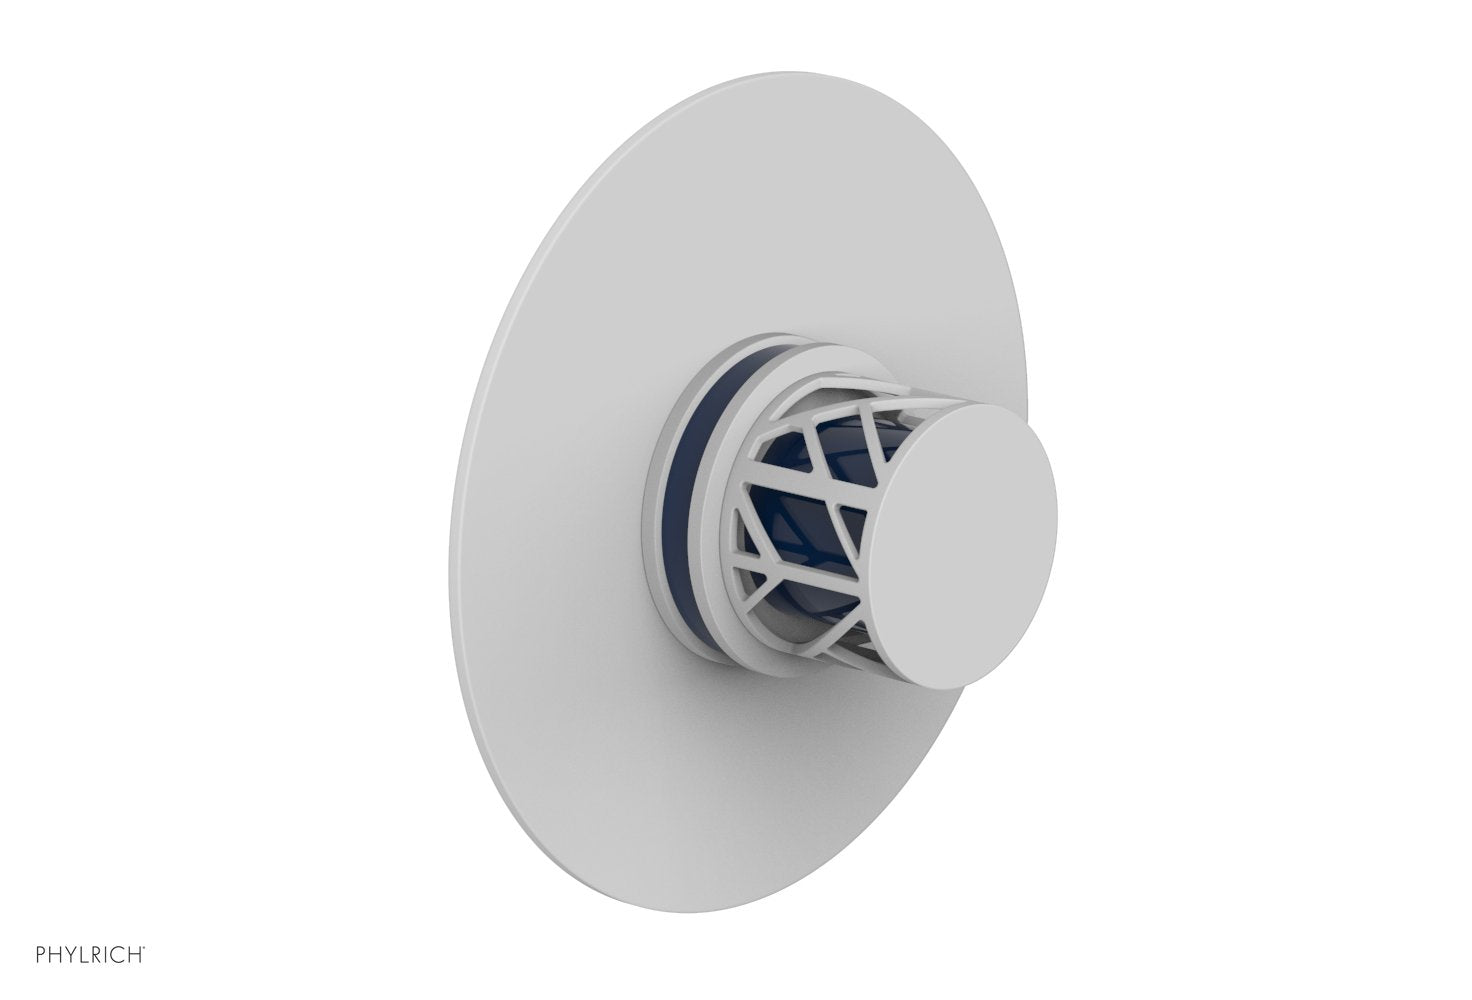 Phylrich JOLIE Pressure Balance Shower Plate & Handle Trim, Round Handle with "Navy Blue" Accents